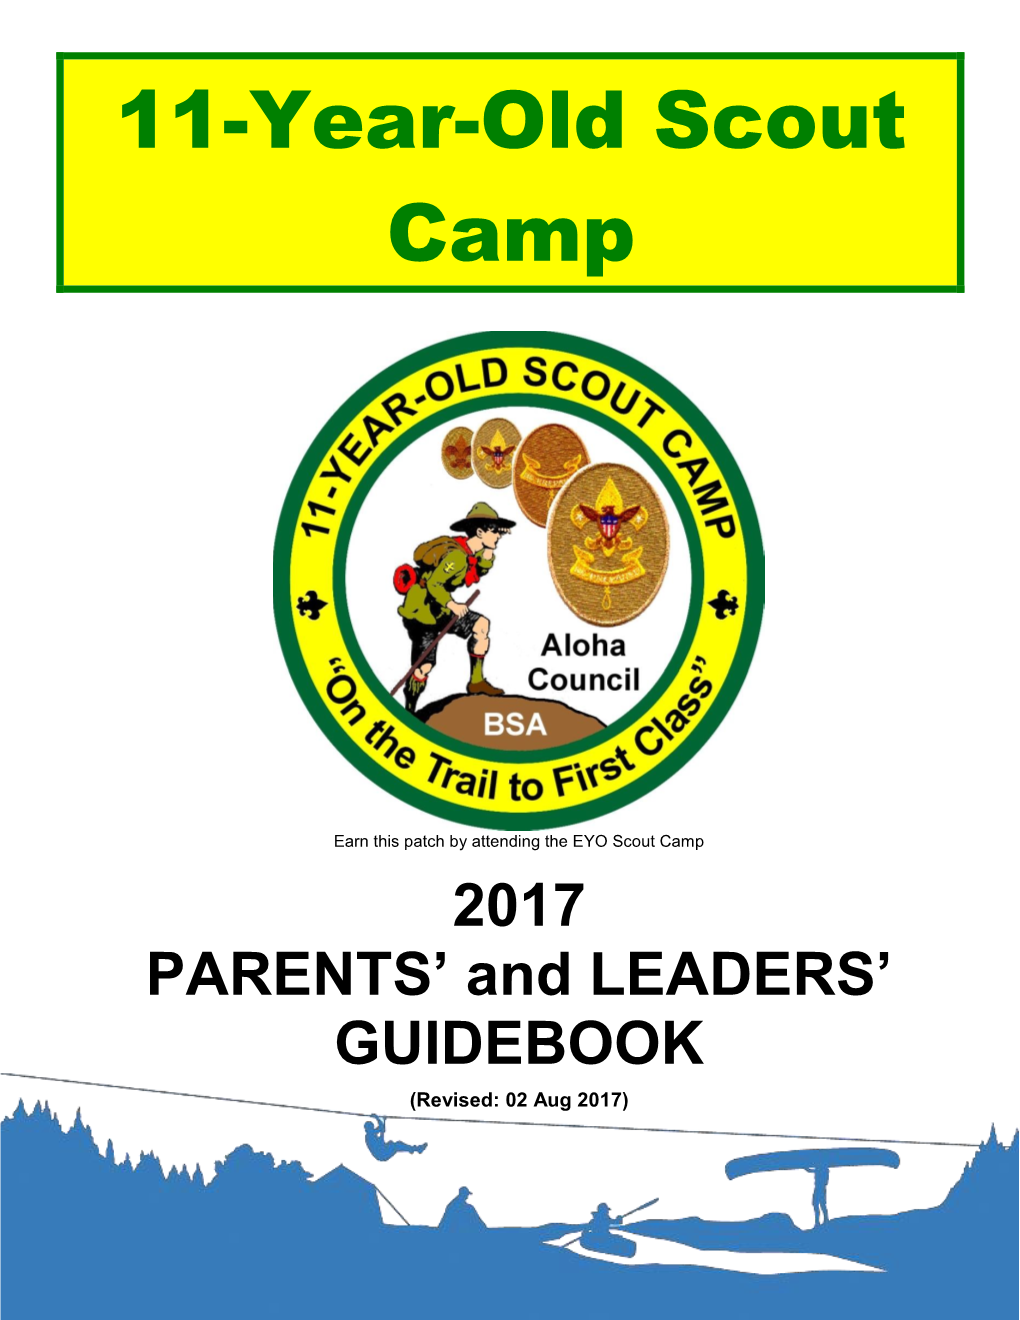 11-Year-Old Scout Camp